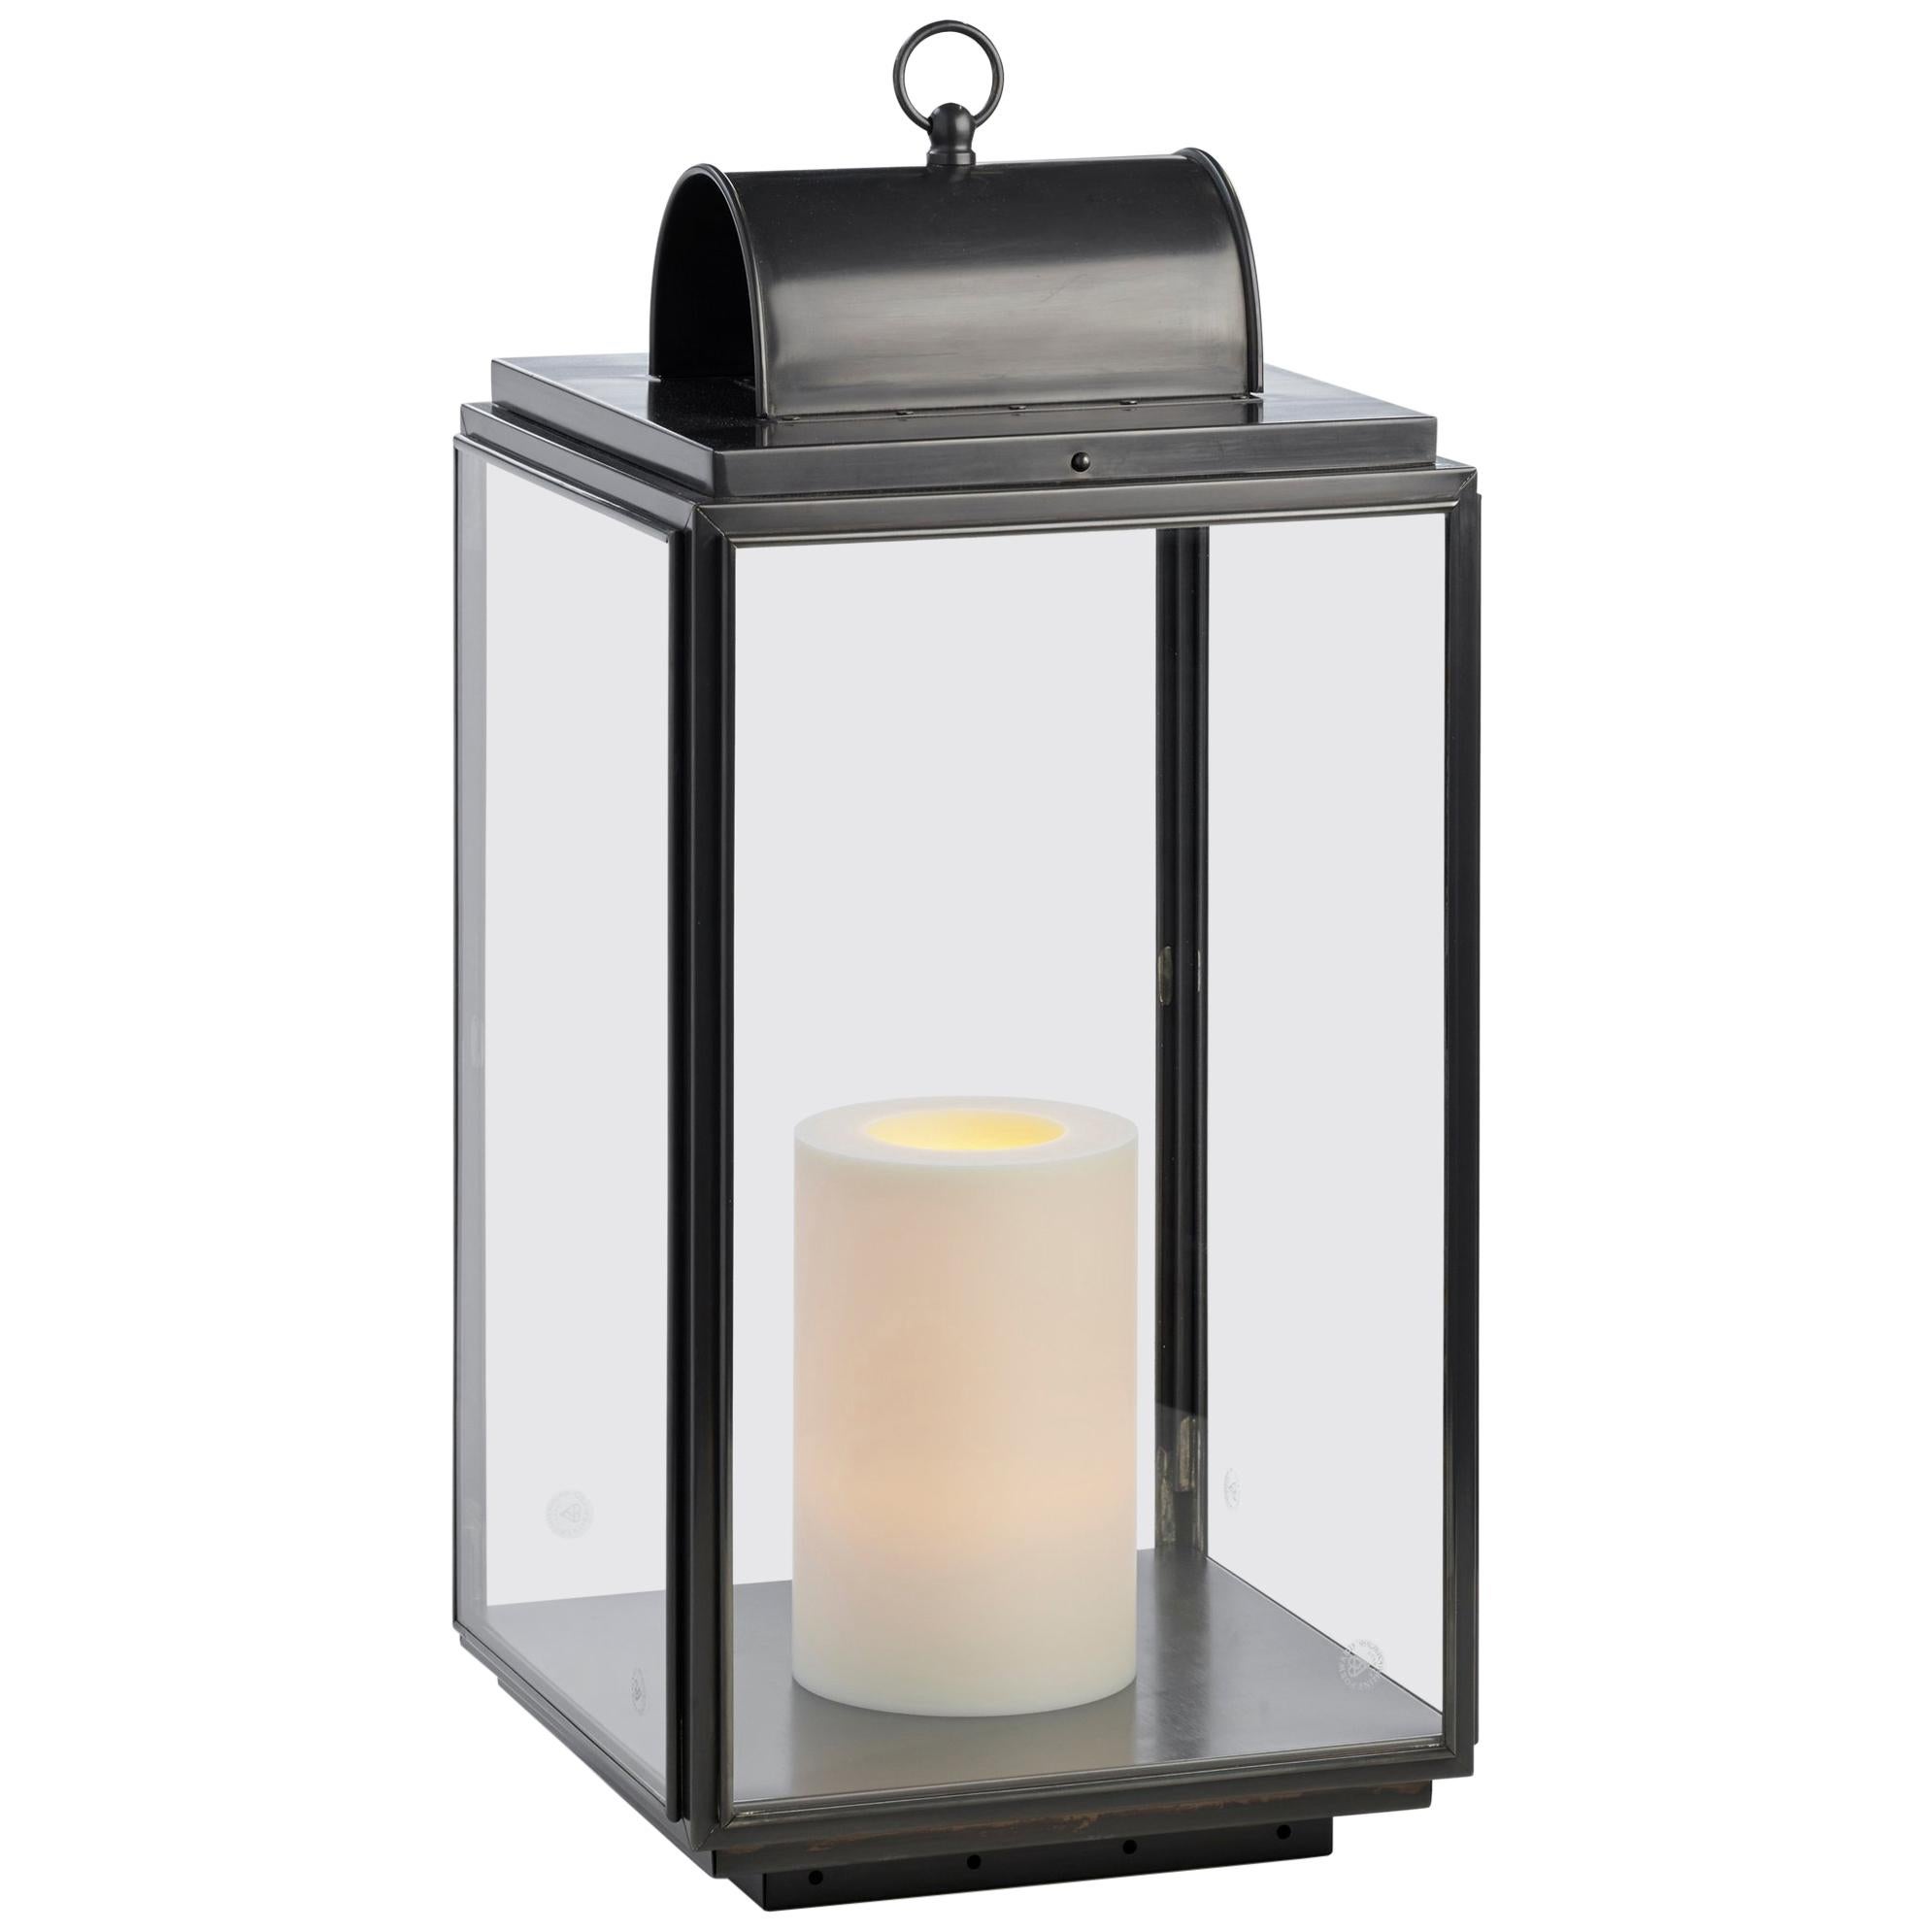 Tekna Penrose on 230V Candle Light with Dark Bronze Finish and Clear Glass